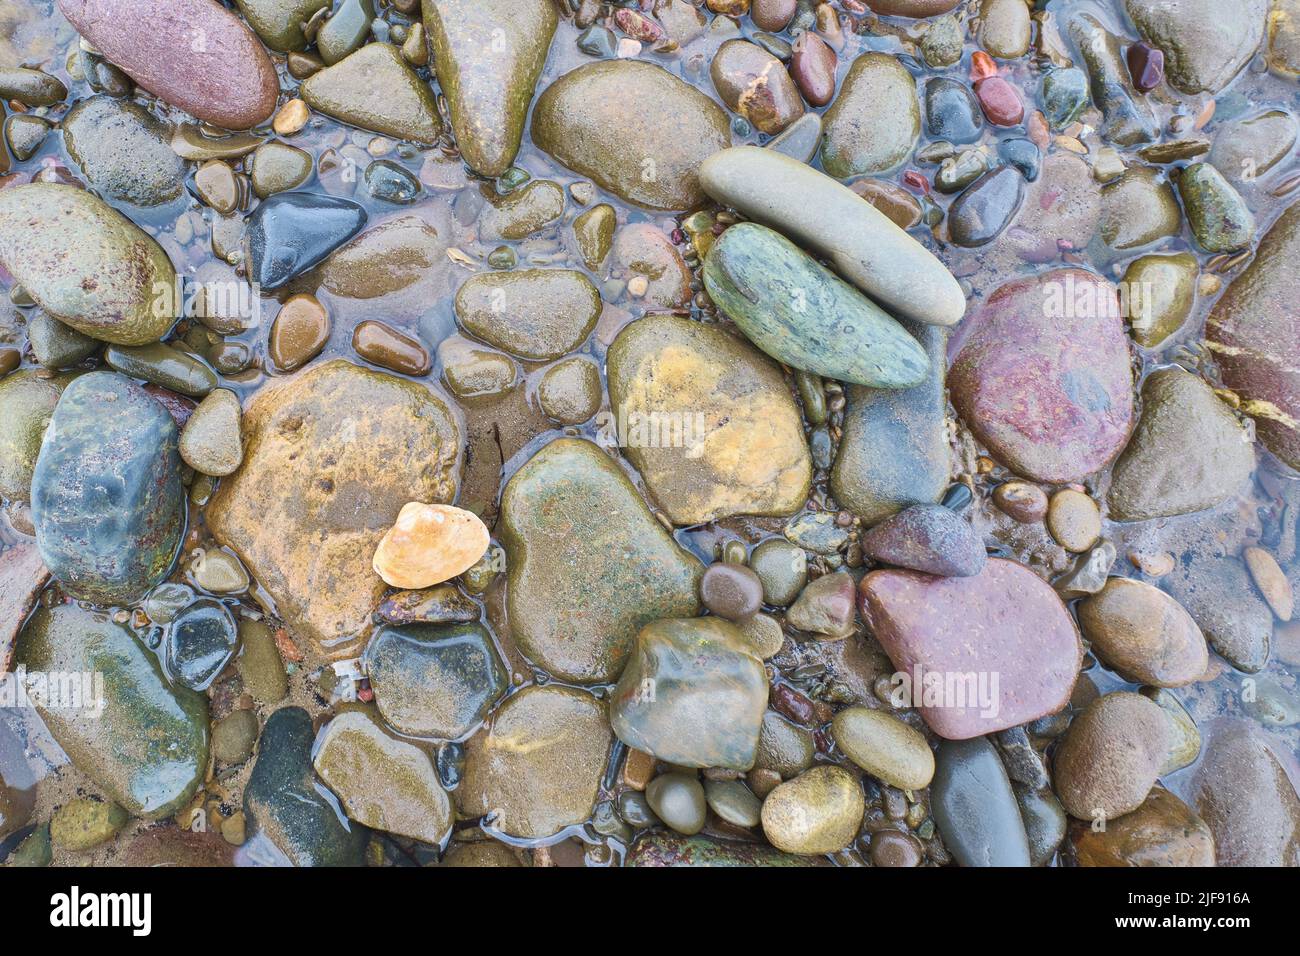 A single clam shell sits among many beautiful rocks on the ocean floor at low tide at Glace Bay Beach. Stock Photo